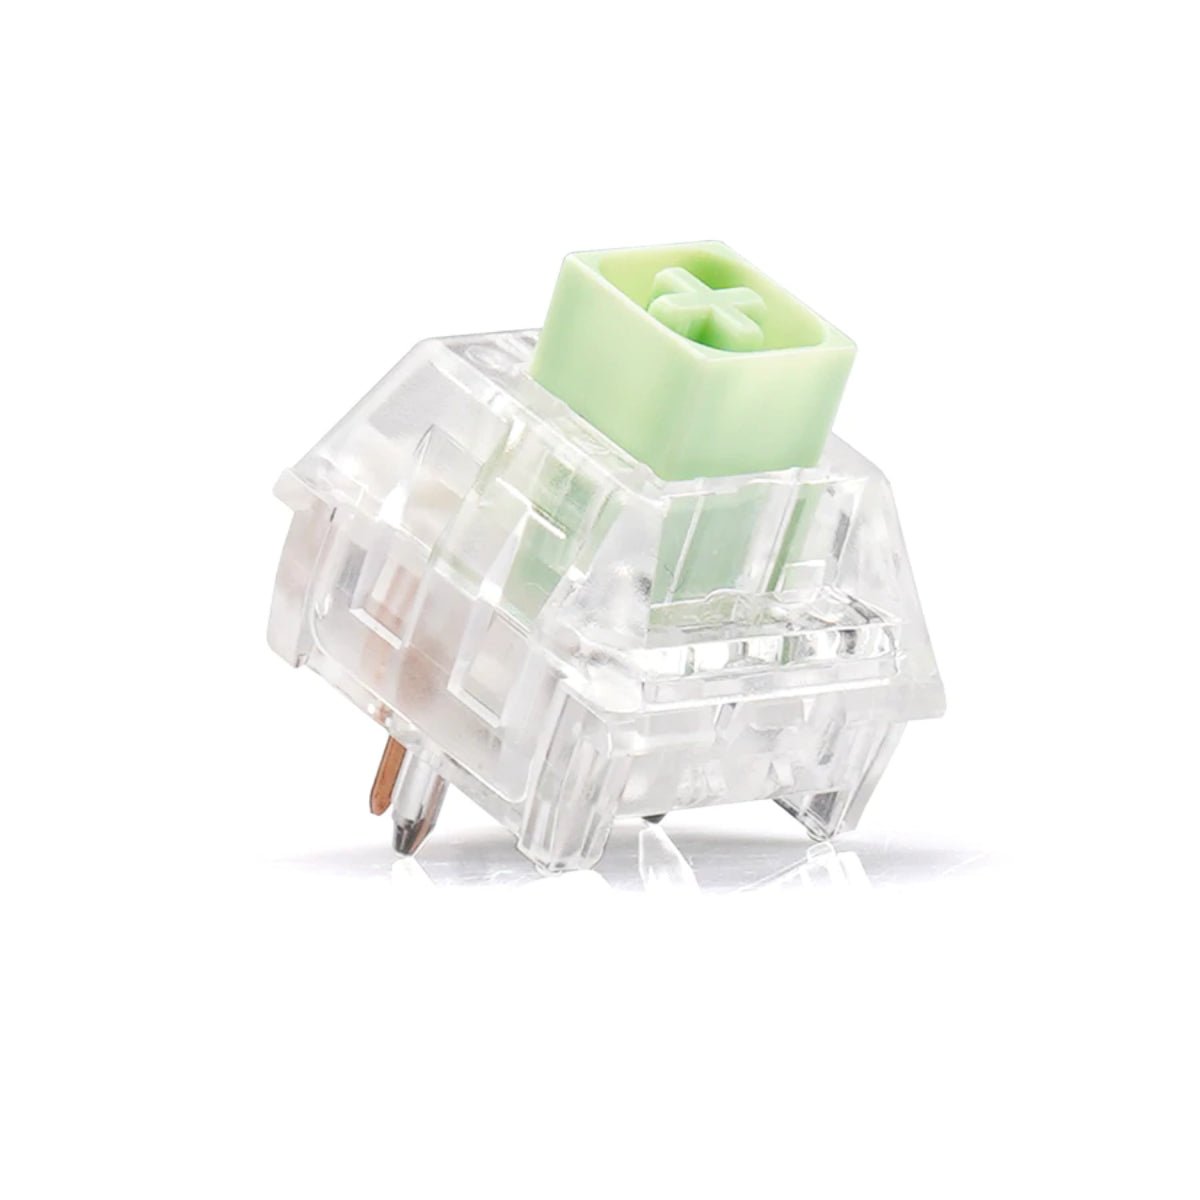 KBD Fans Kailh Box Crystal Switches - Jade - Store 974 | ستور ٩٧٤